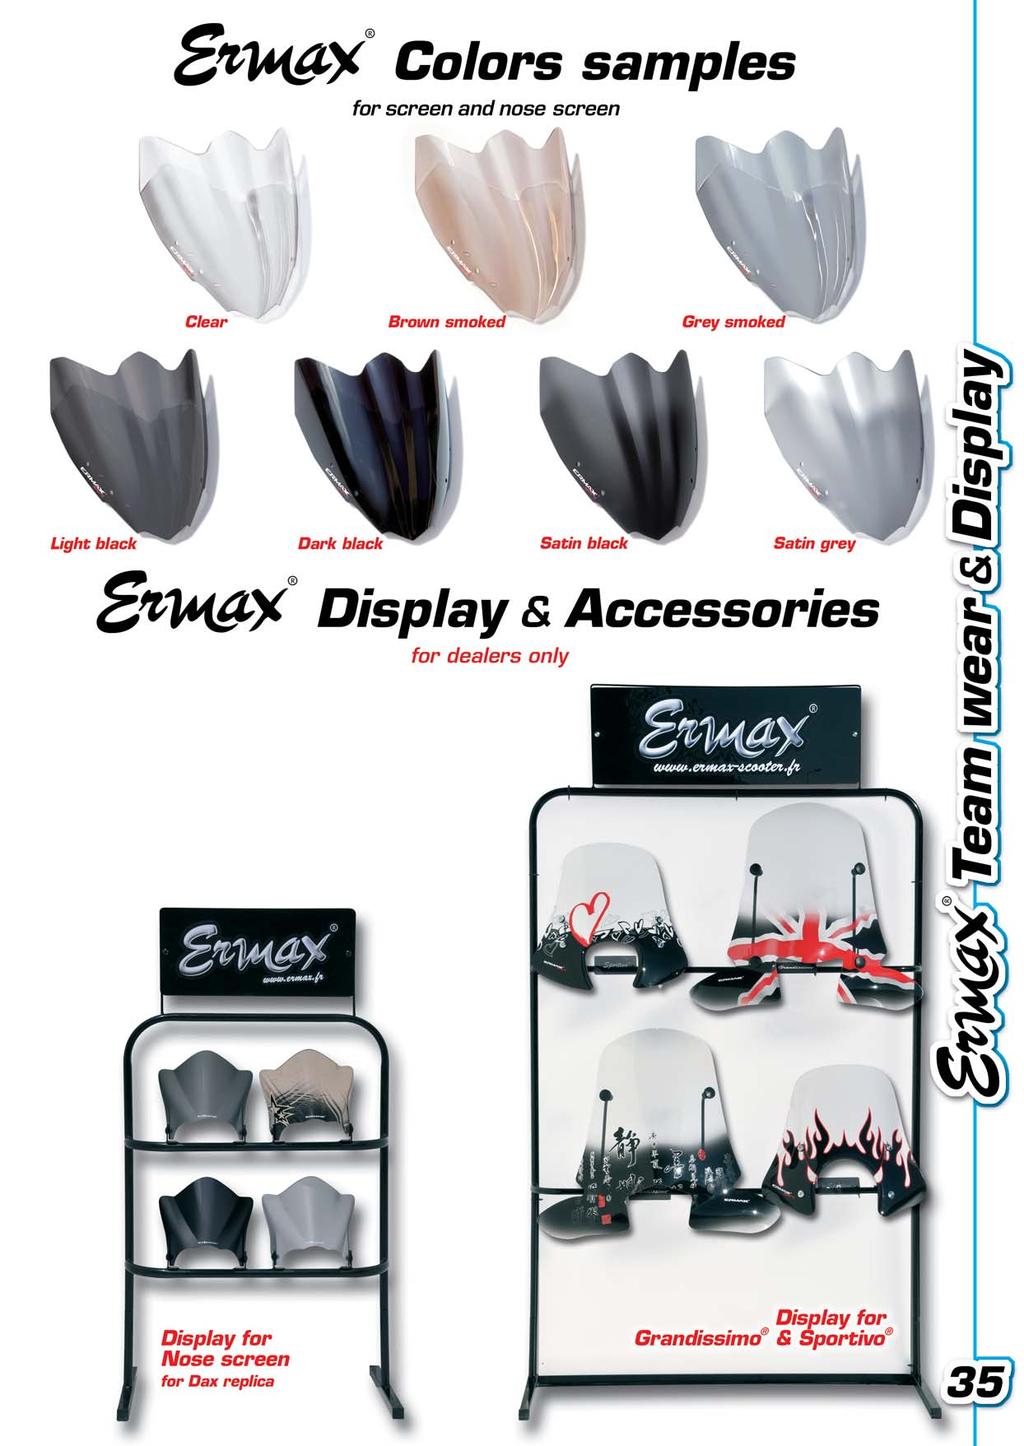 Display kit for universal windshields : & ivo Display kit for DAX Replica Nose screen